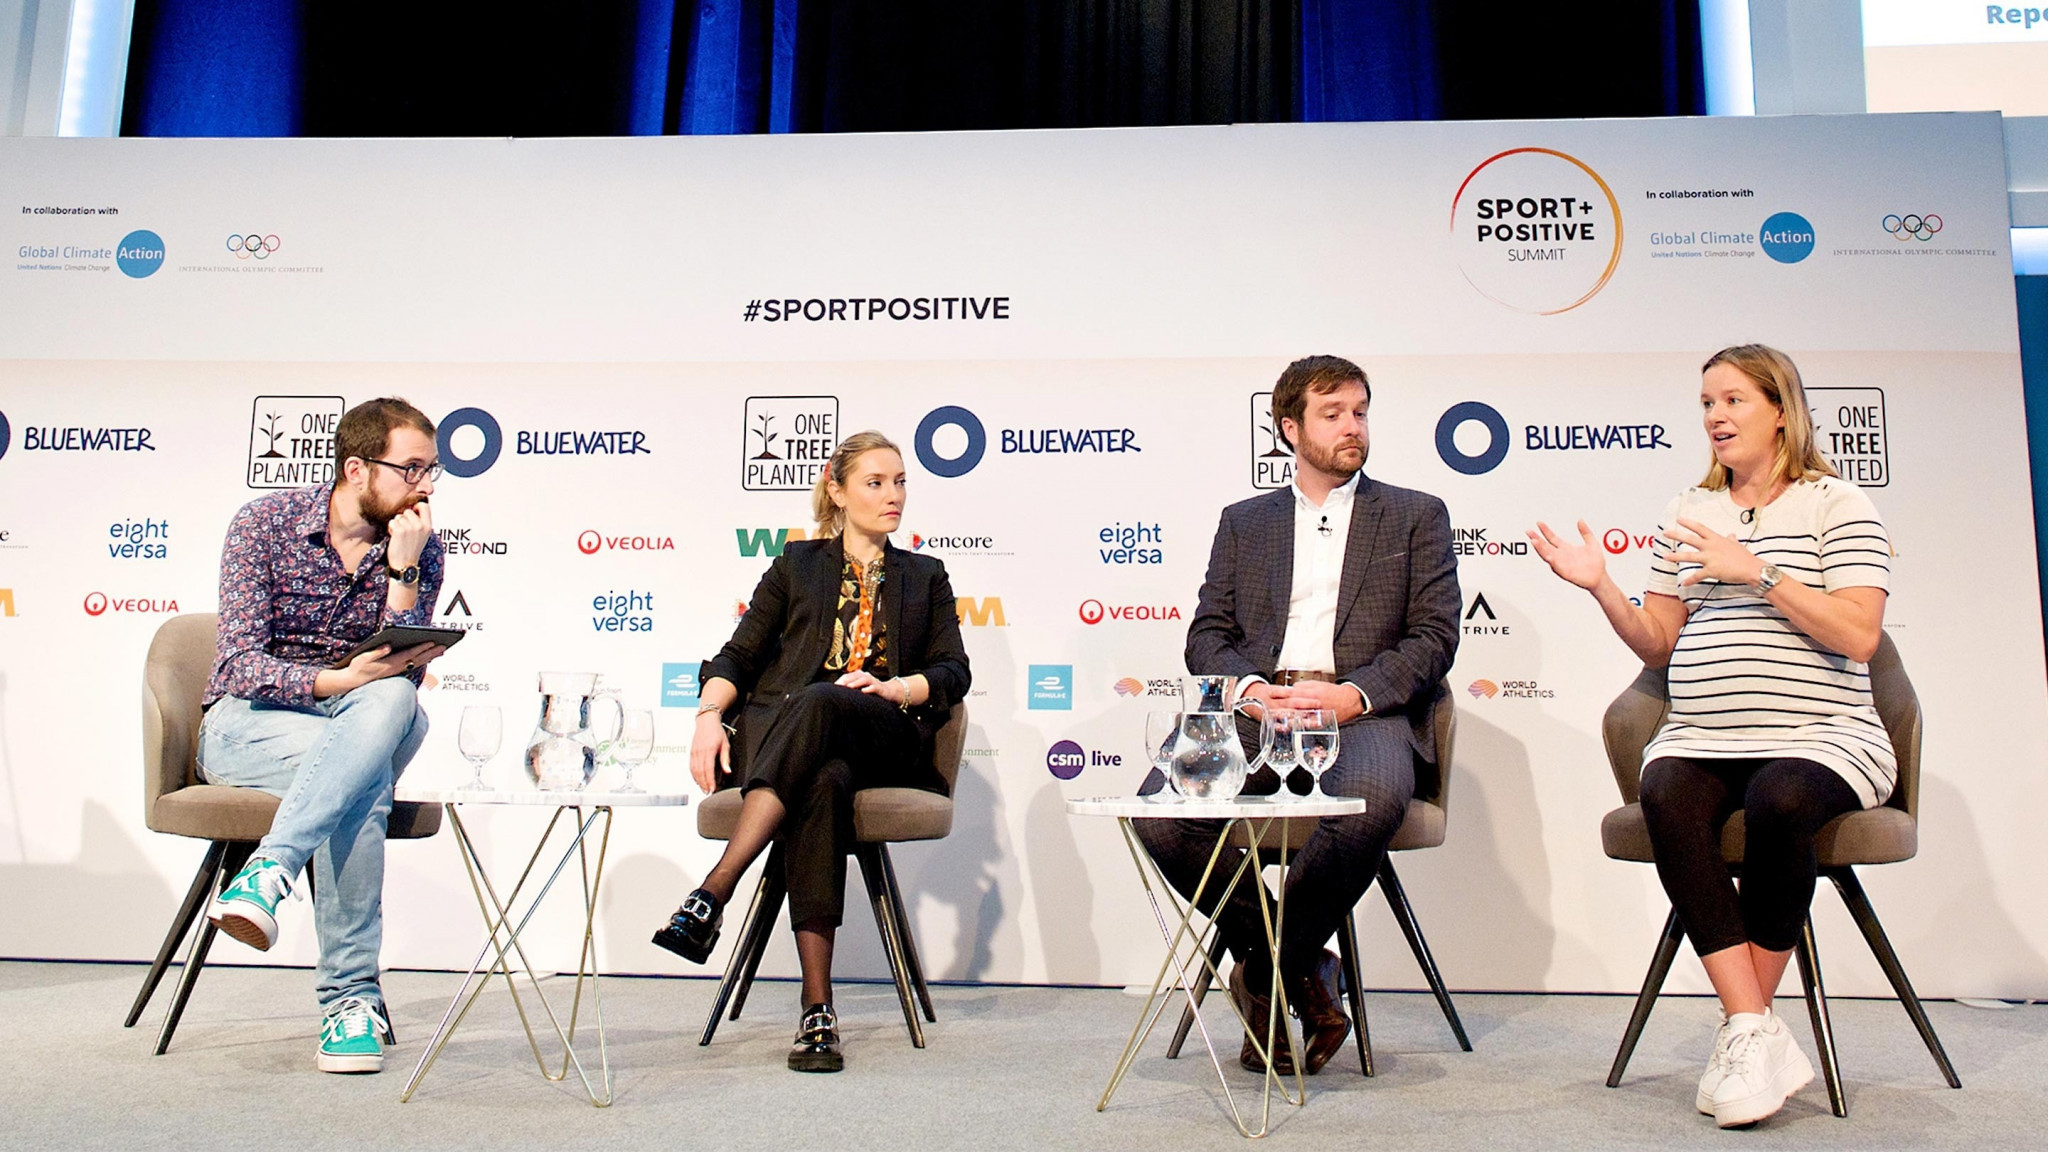 Calls for cooperation on addressing climate change made at Sport Positive Summit